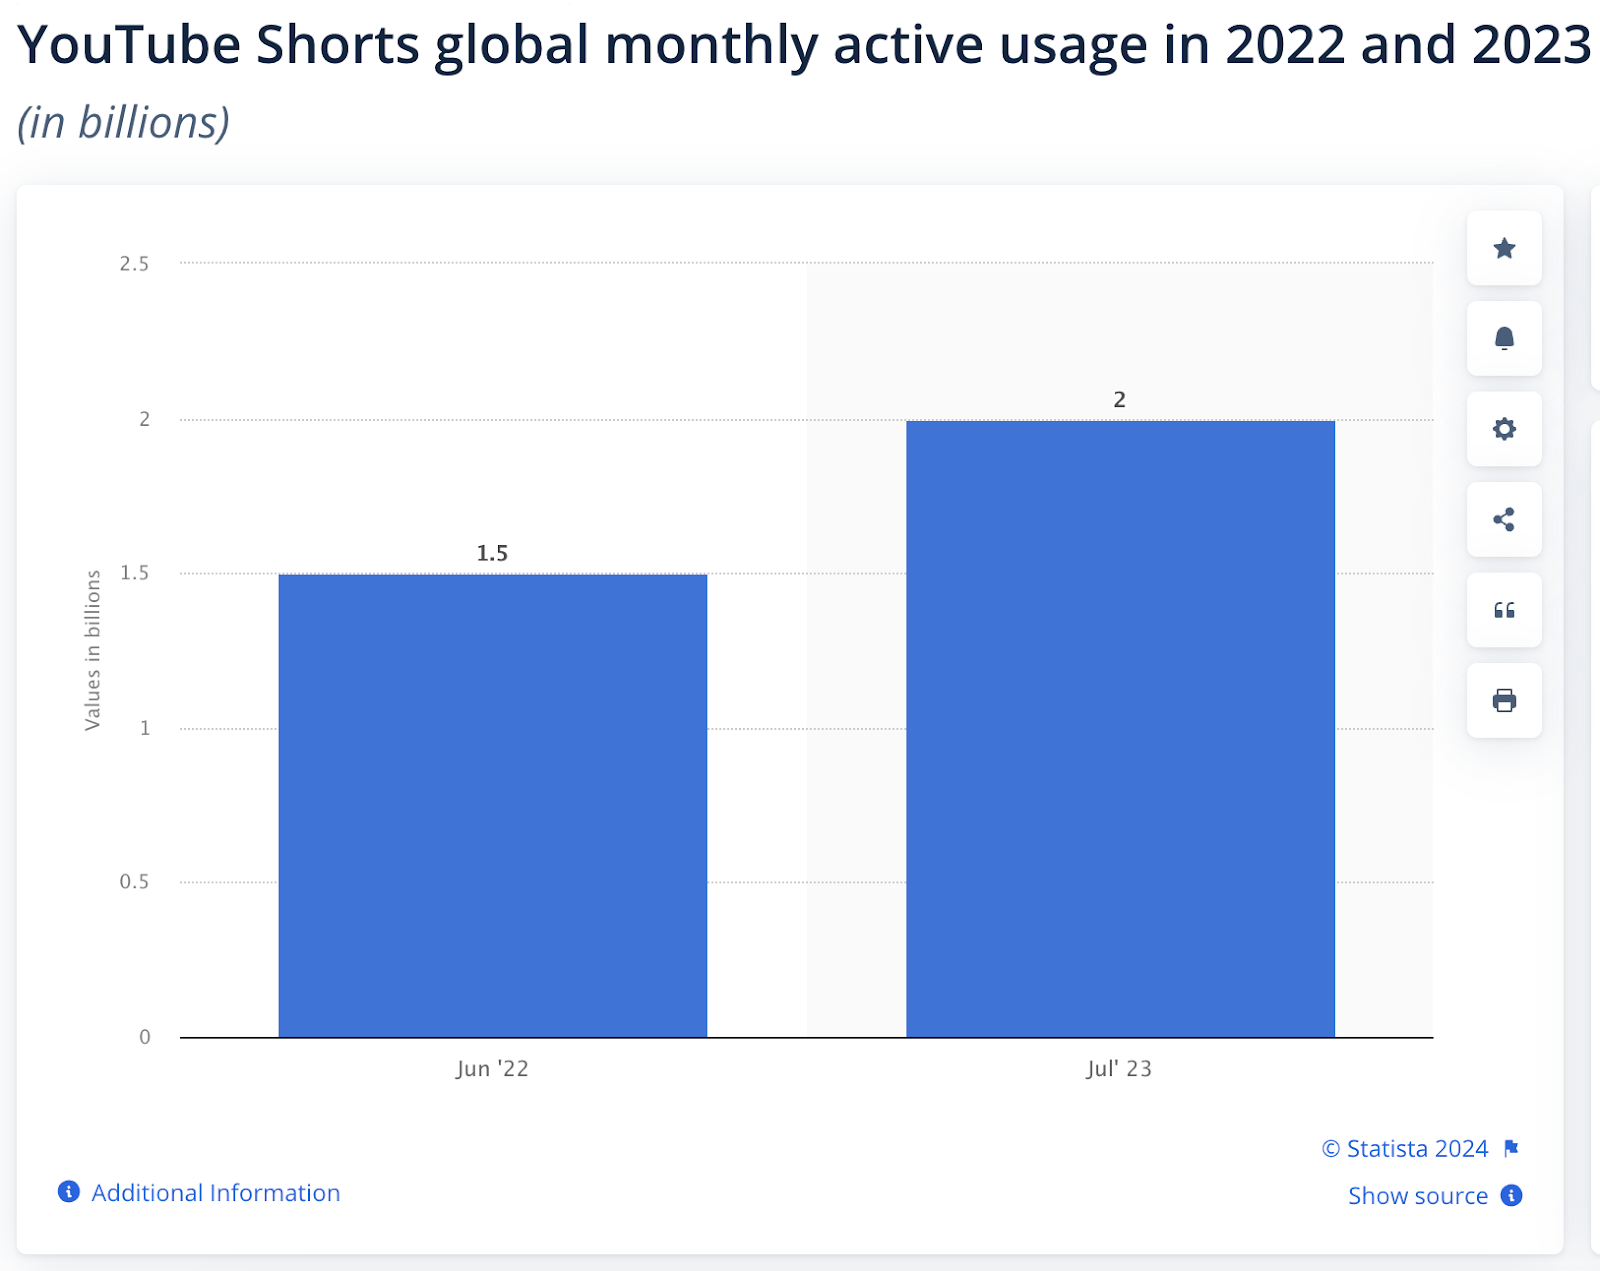 YouTube Shorts Global Monthly Active Usage